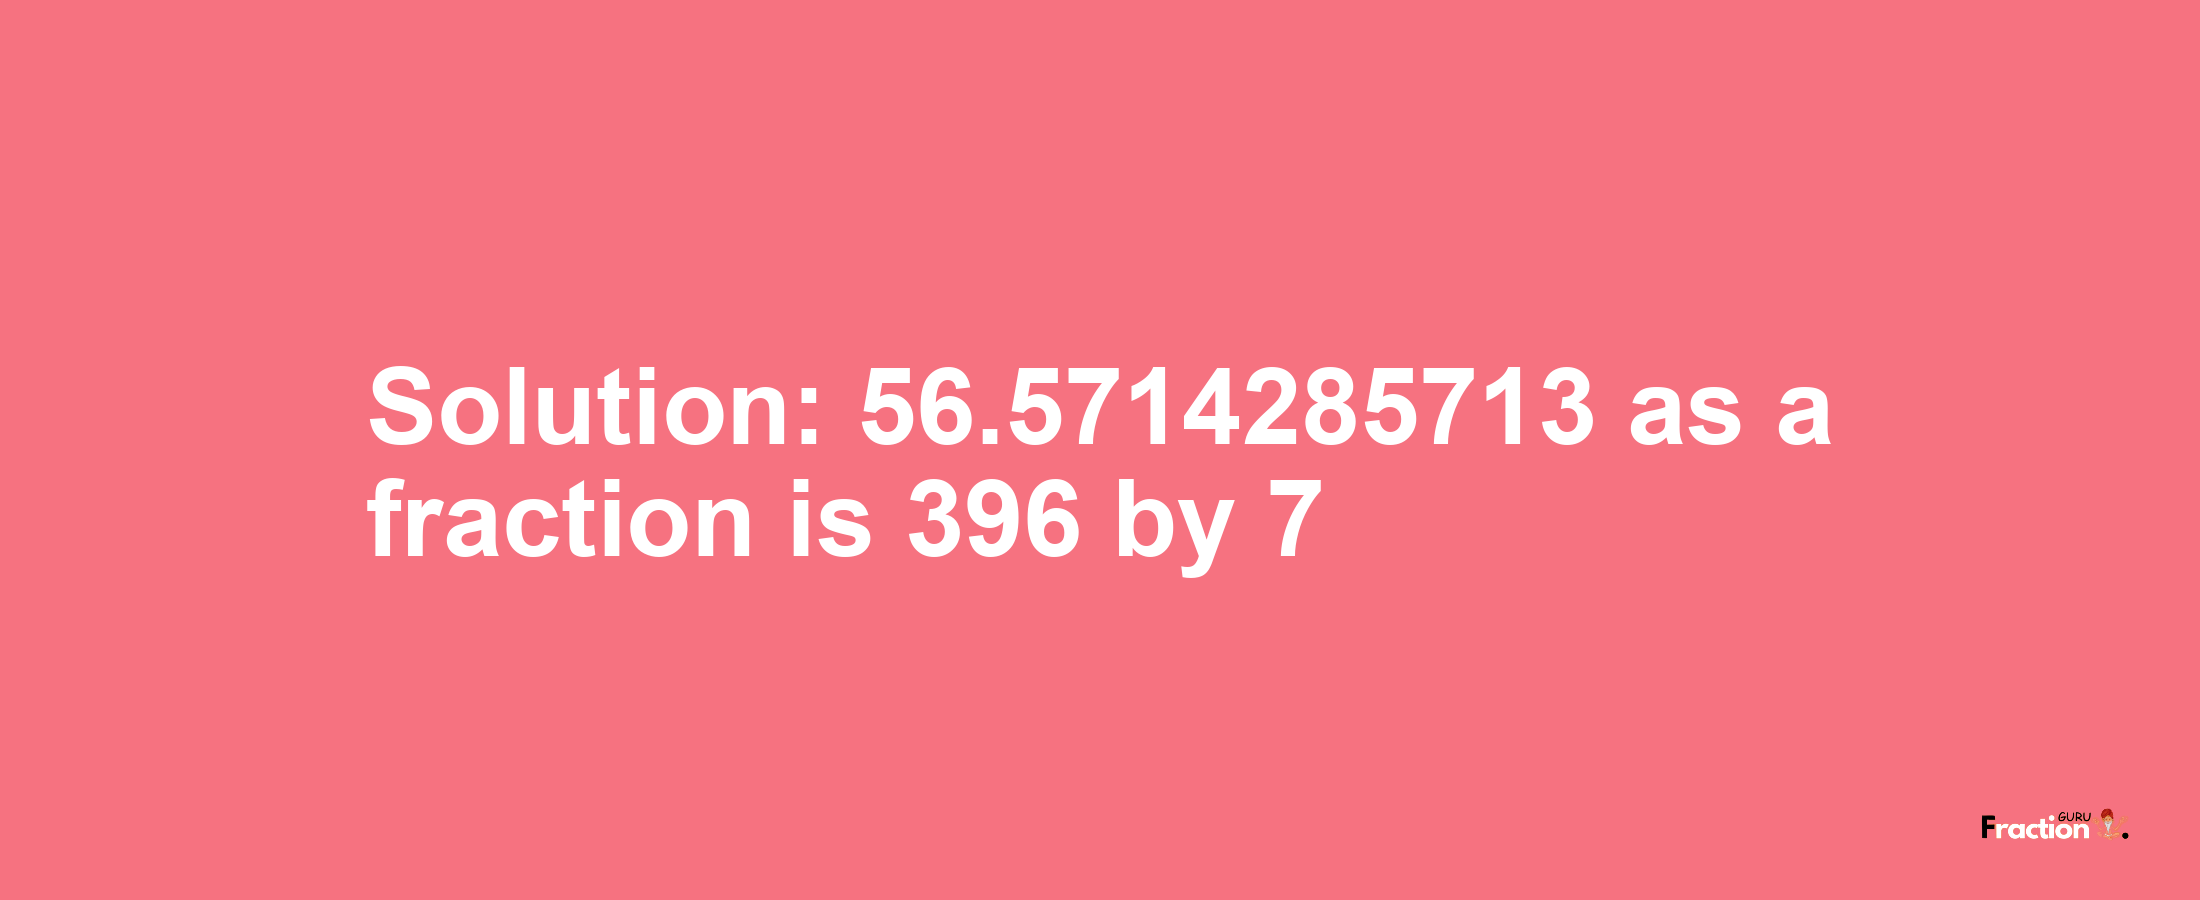 Solution:56.5714285713 as a fraction is 396/7